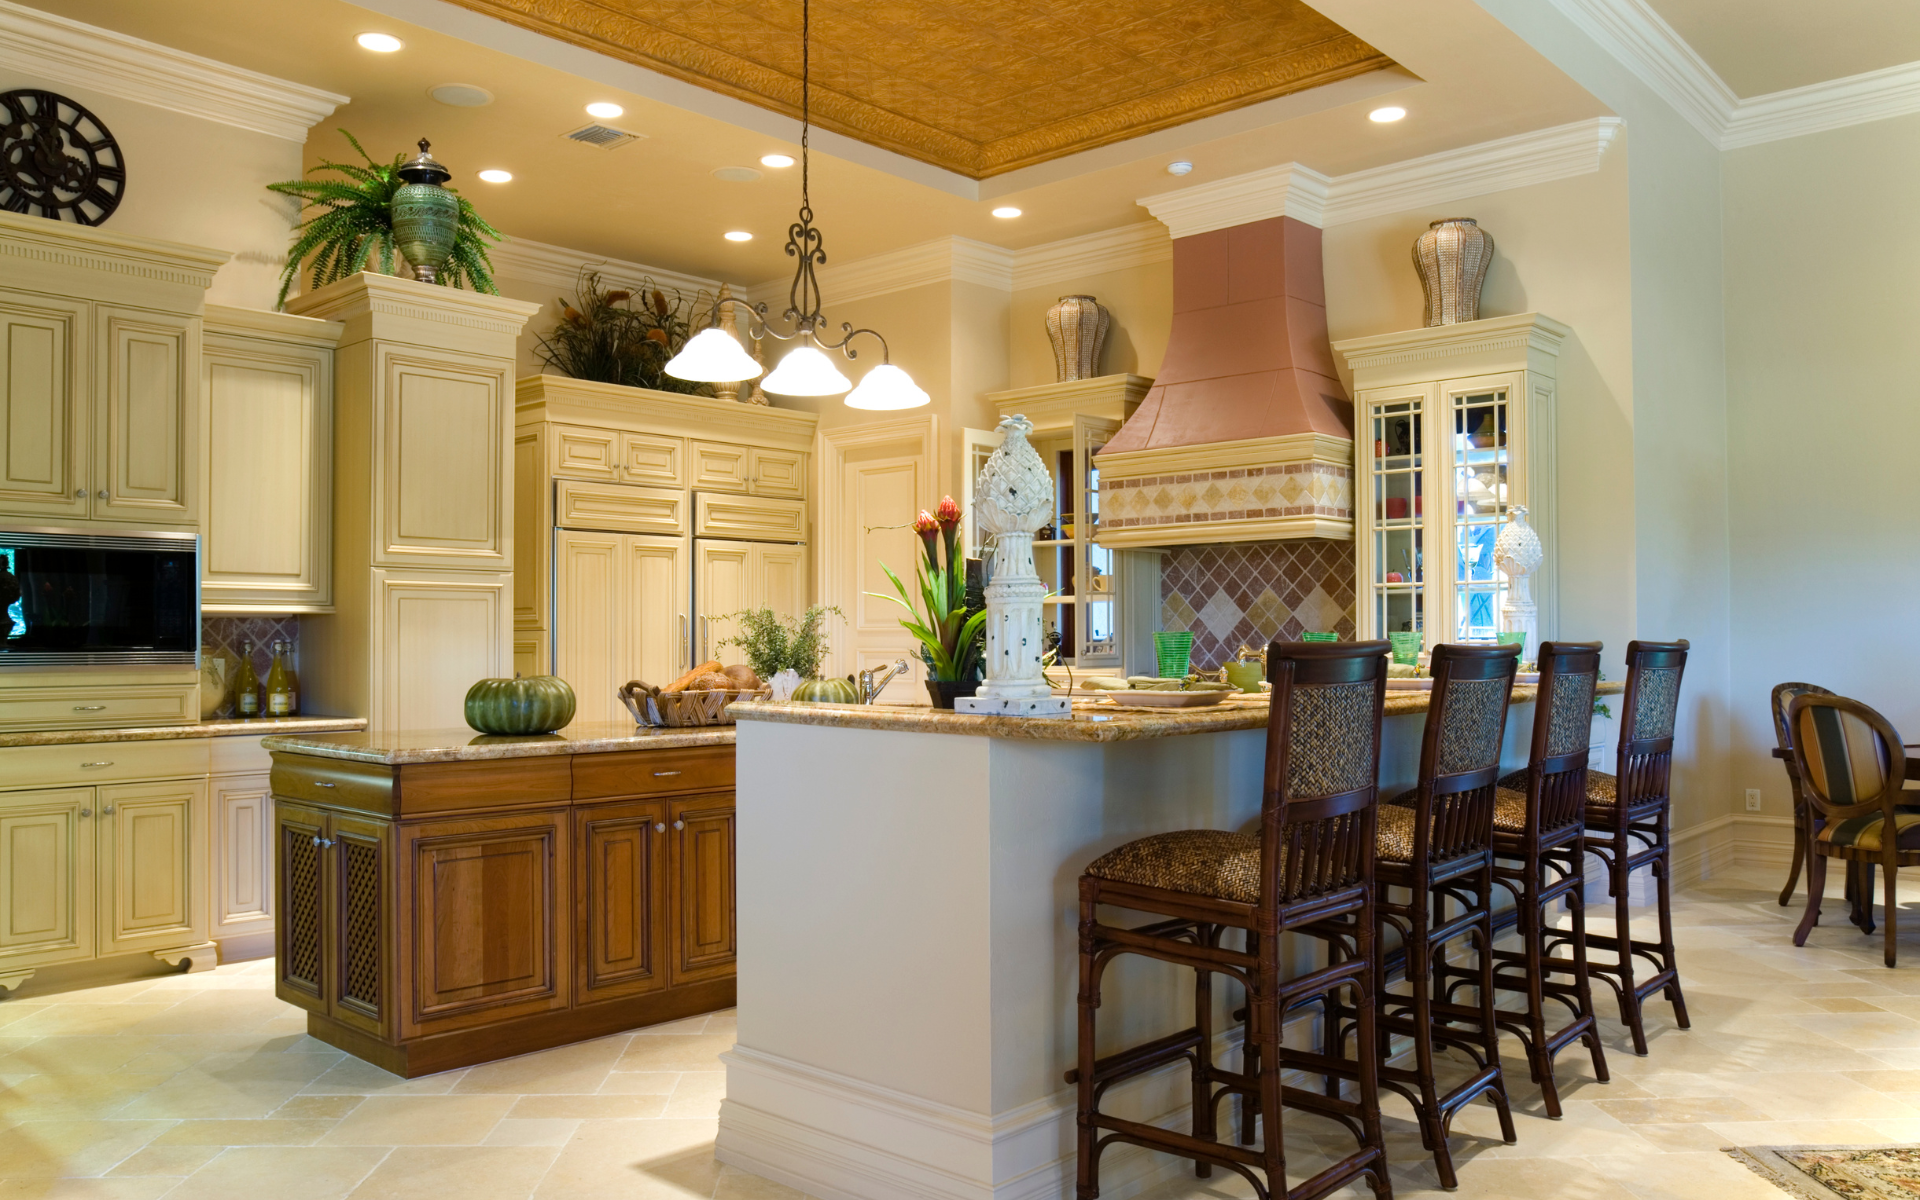 Transitional style kitchen with raised panel cabinets